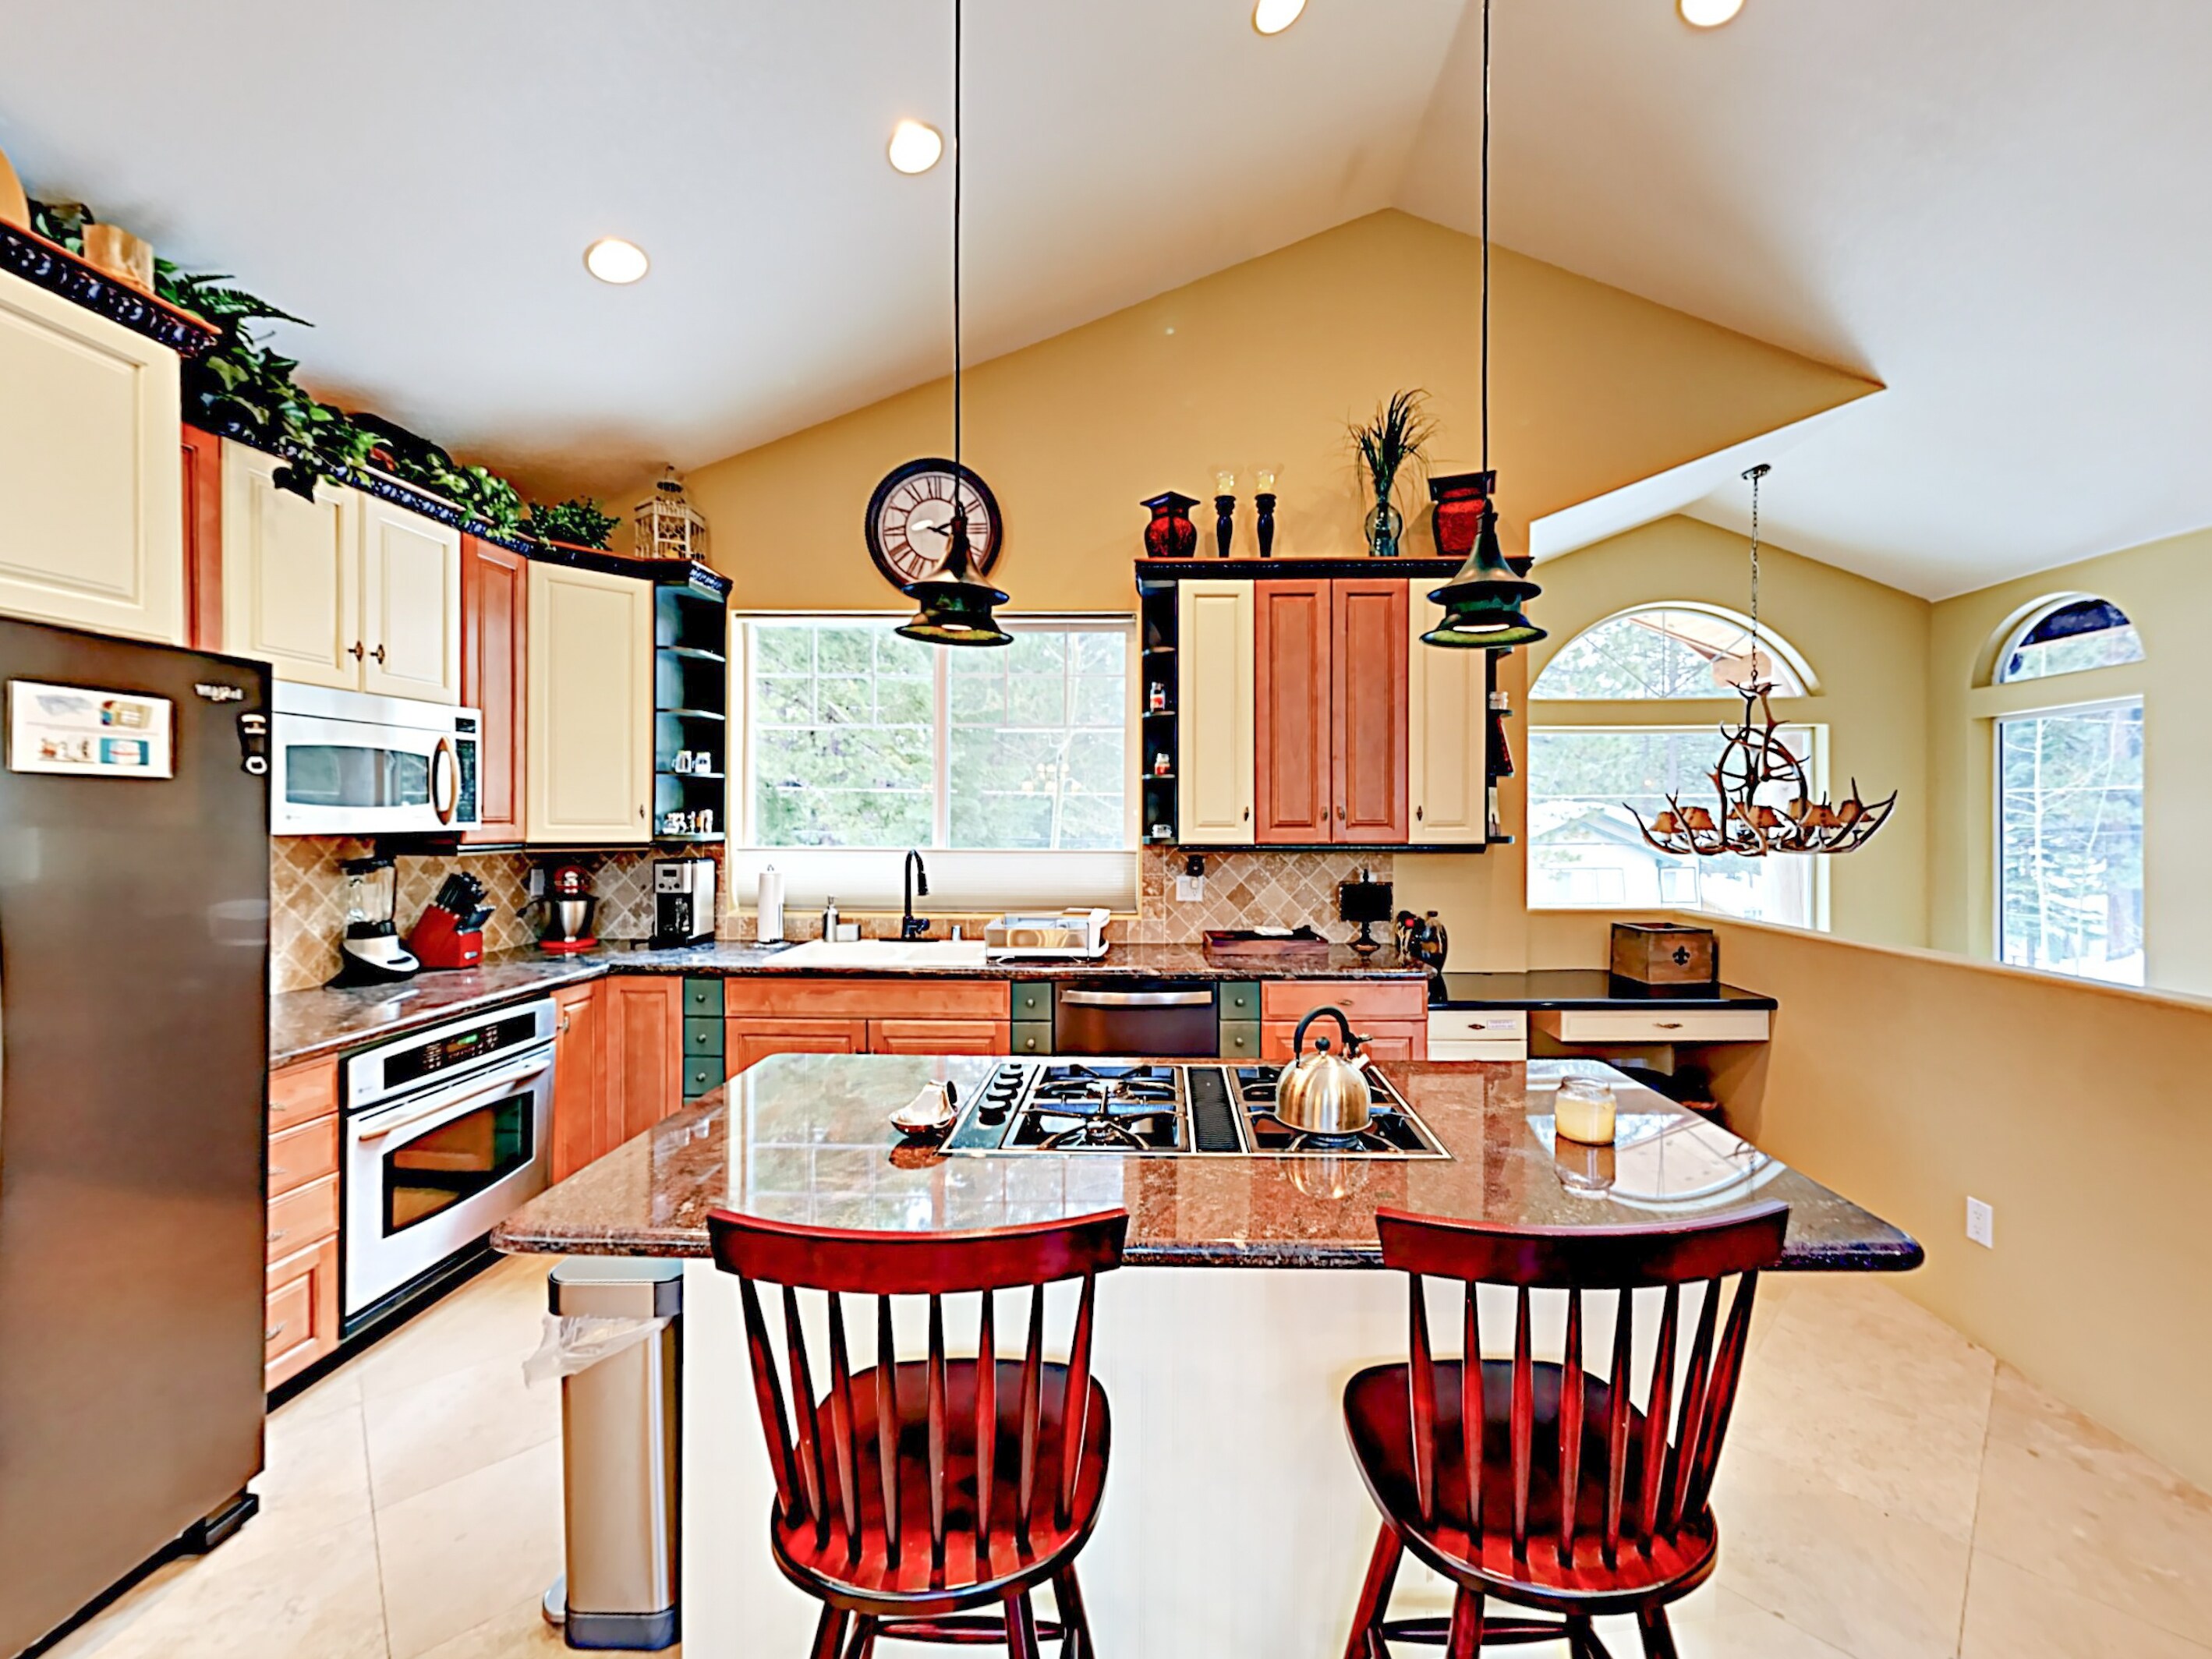 The huge open-concept kitchen features granite countertops and an array of cookware.